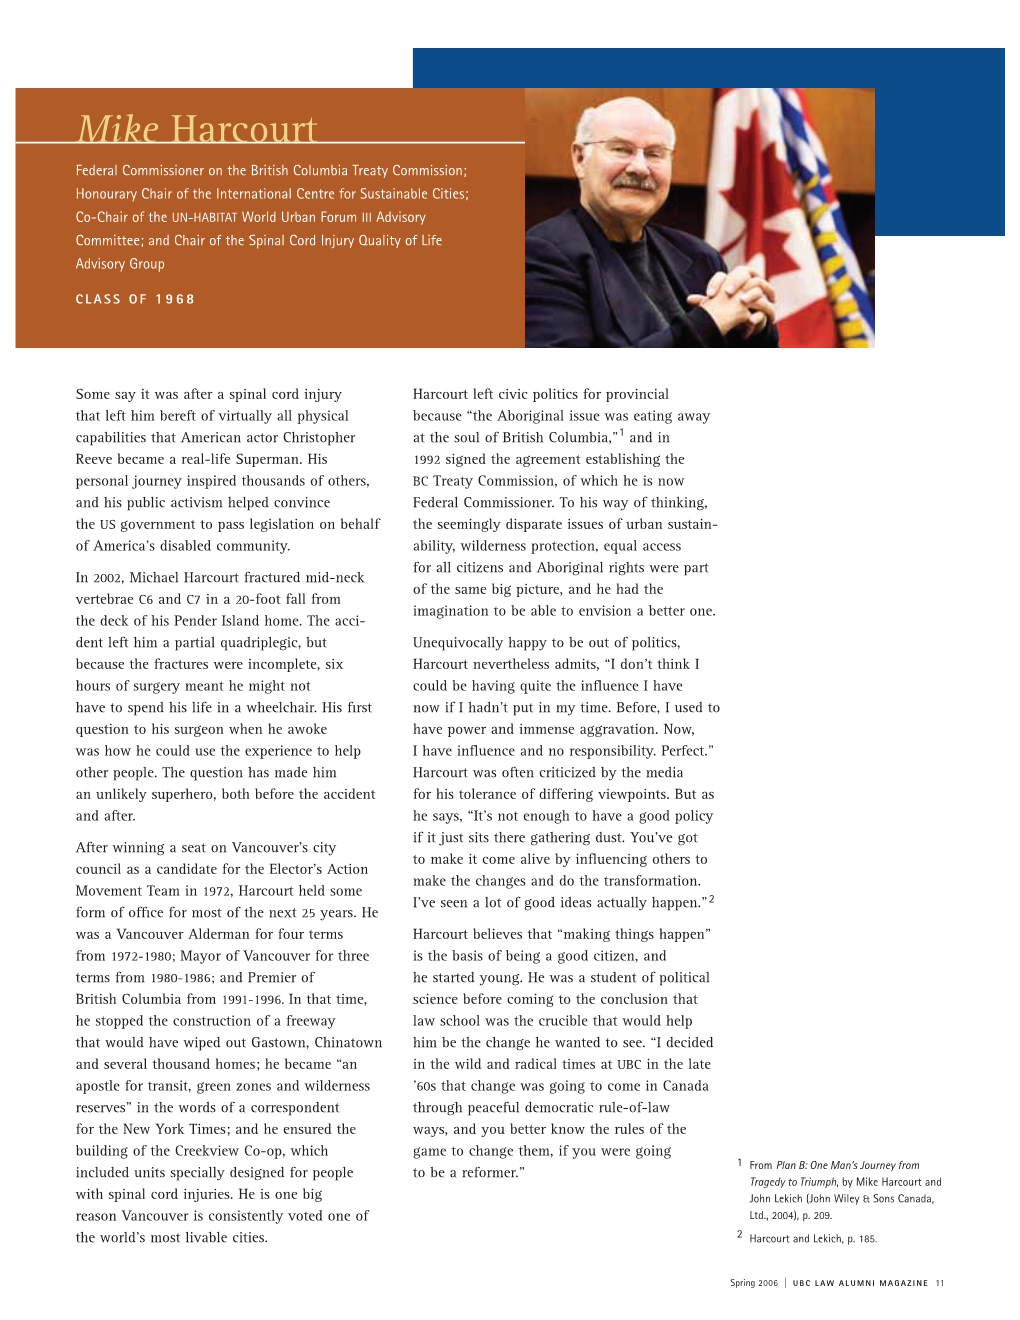 Profile of Mike Harcourt from the UBC Law Alumni Magazine, Spring 2006